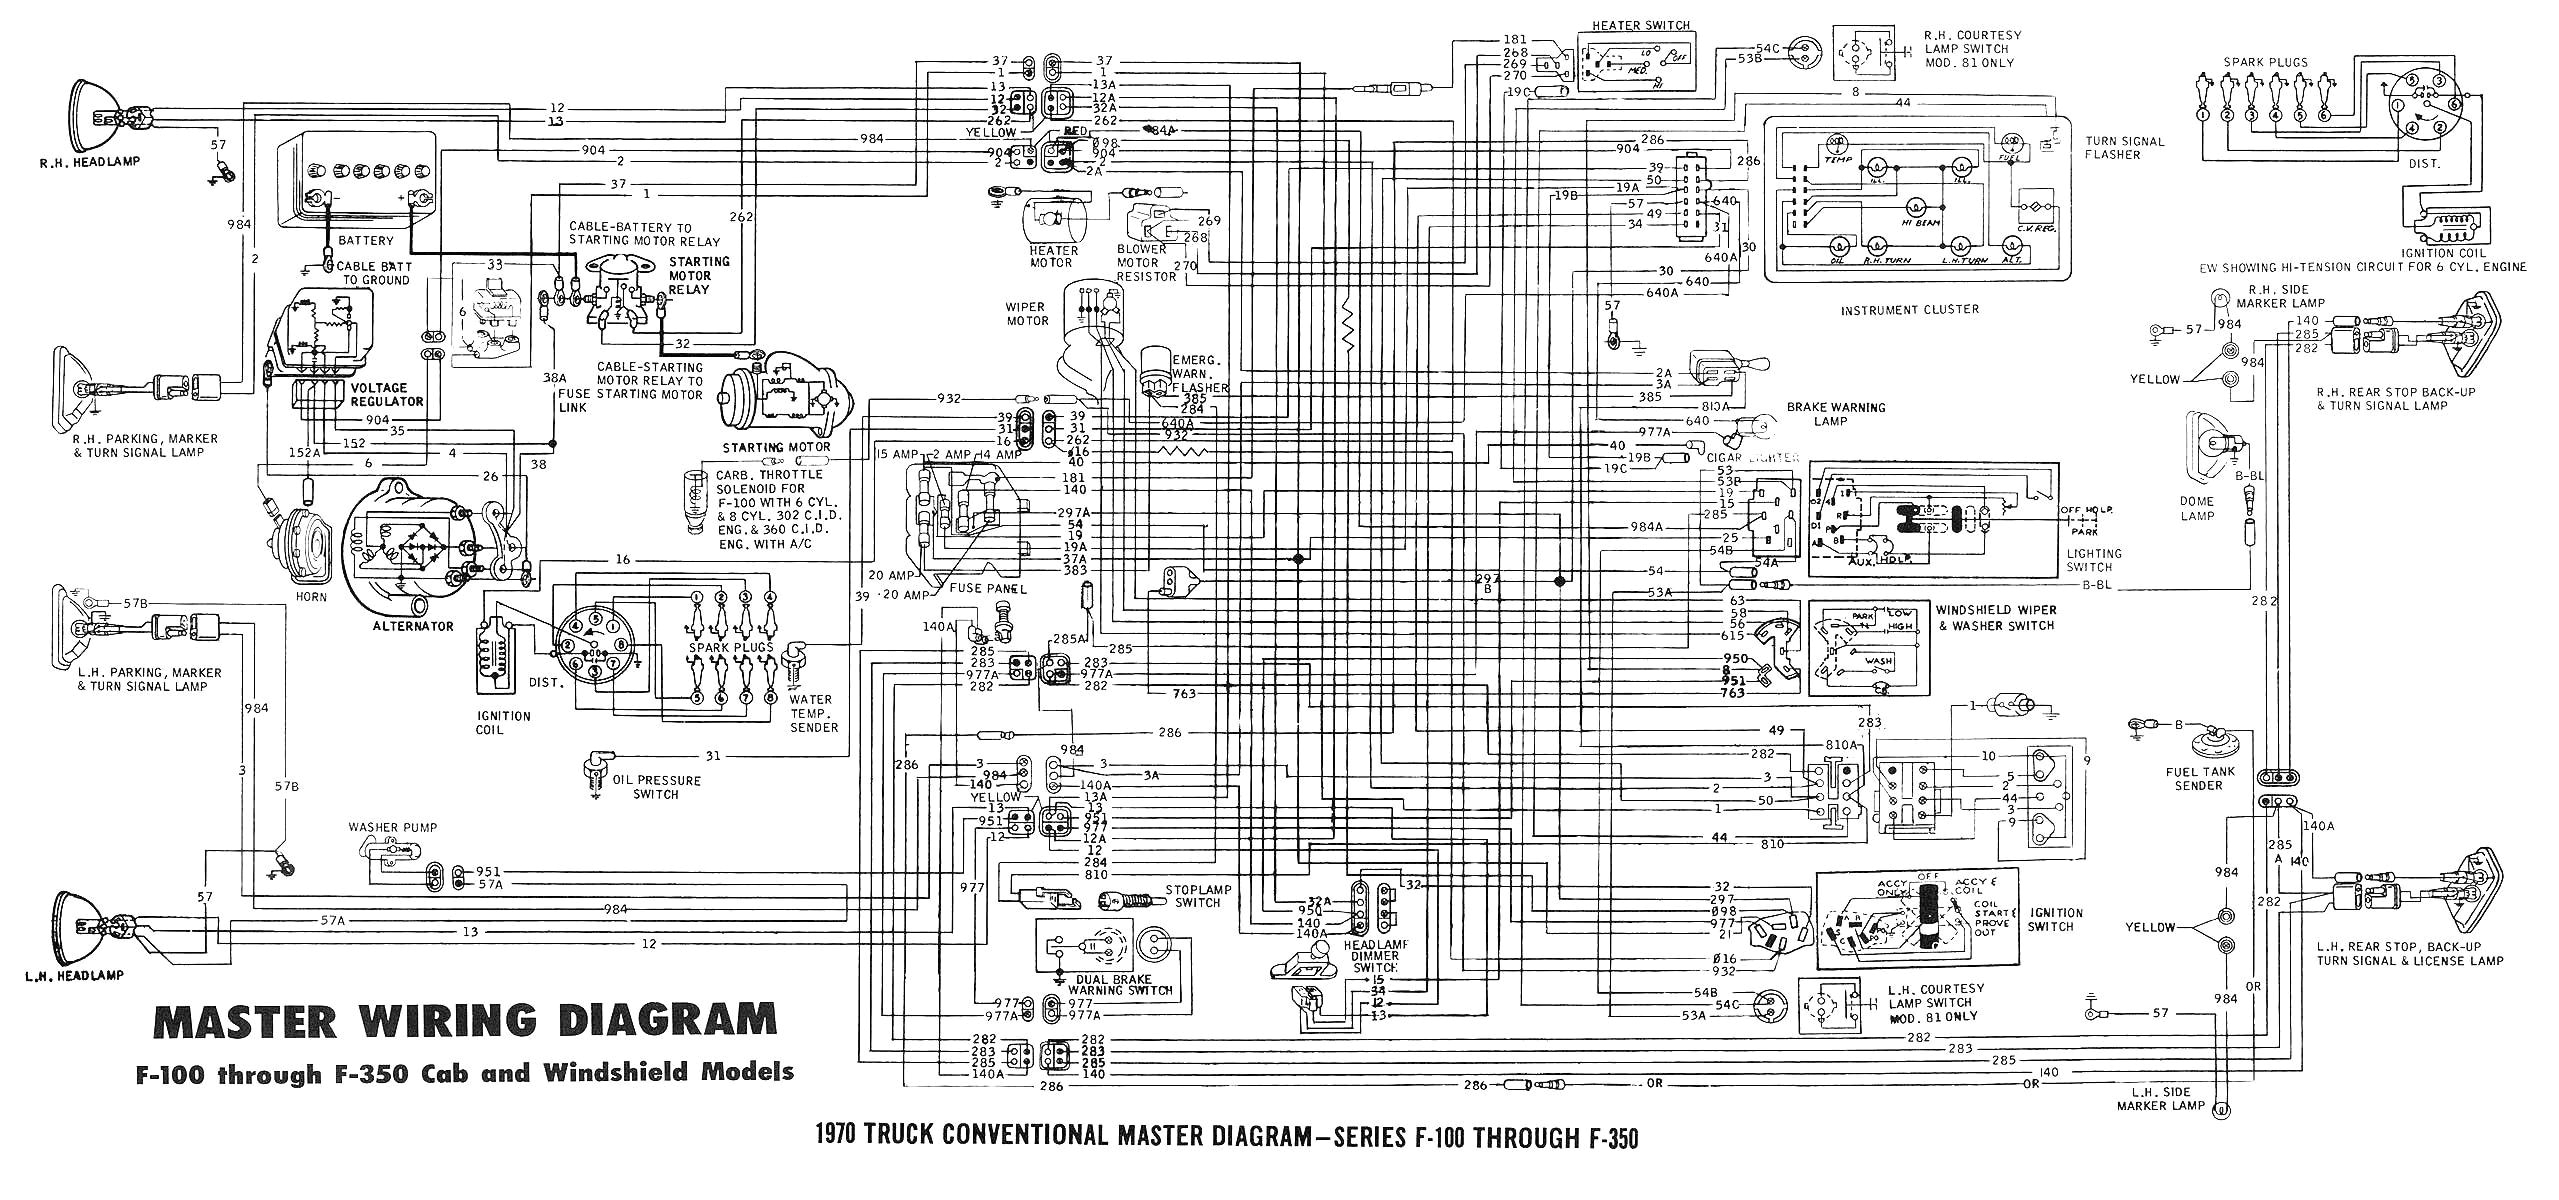 1973 ford f250 wiring diagram online